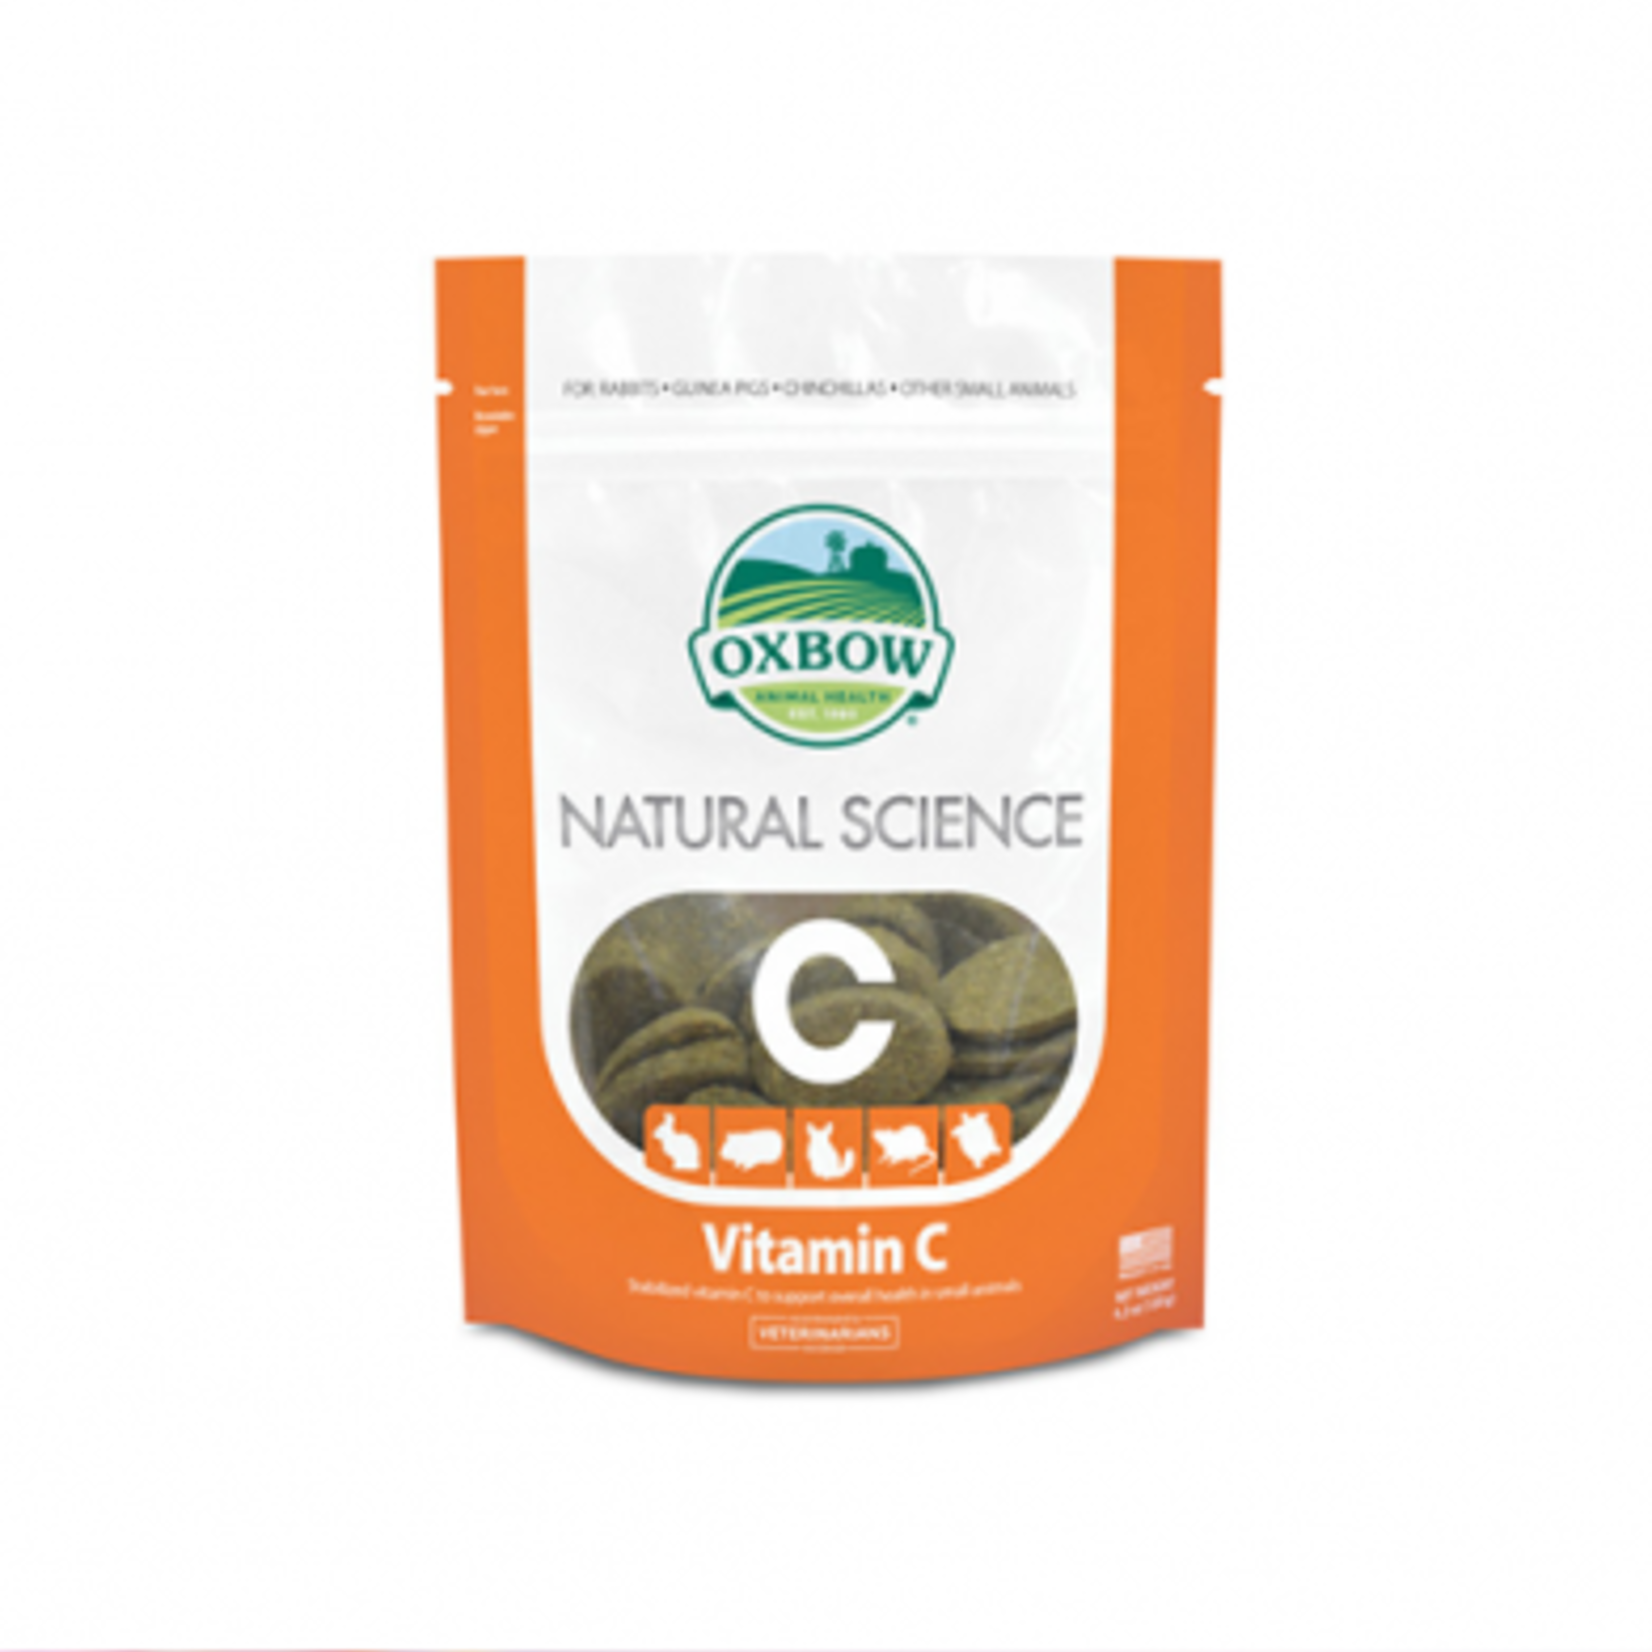 Oxbow Natural Science - Supplément de vitamine C - 60 items